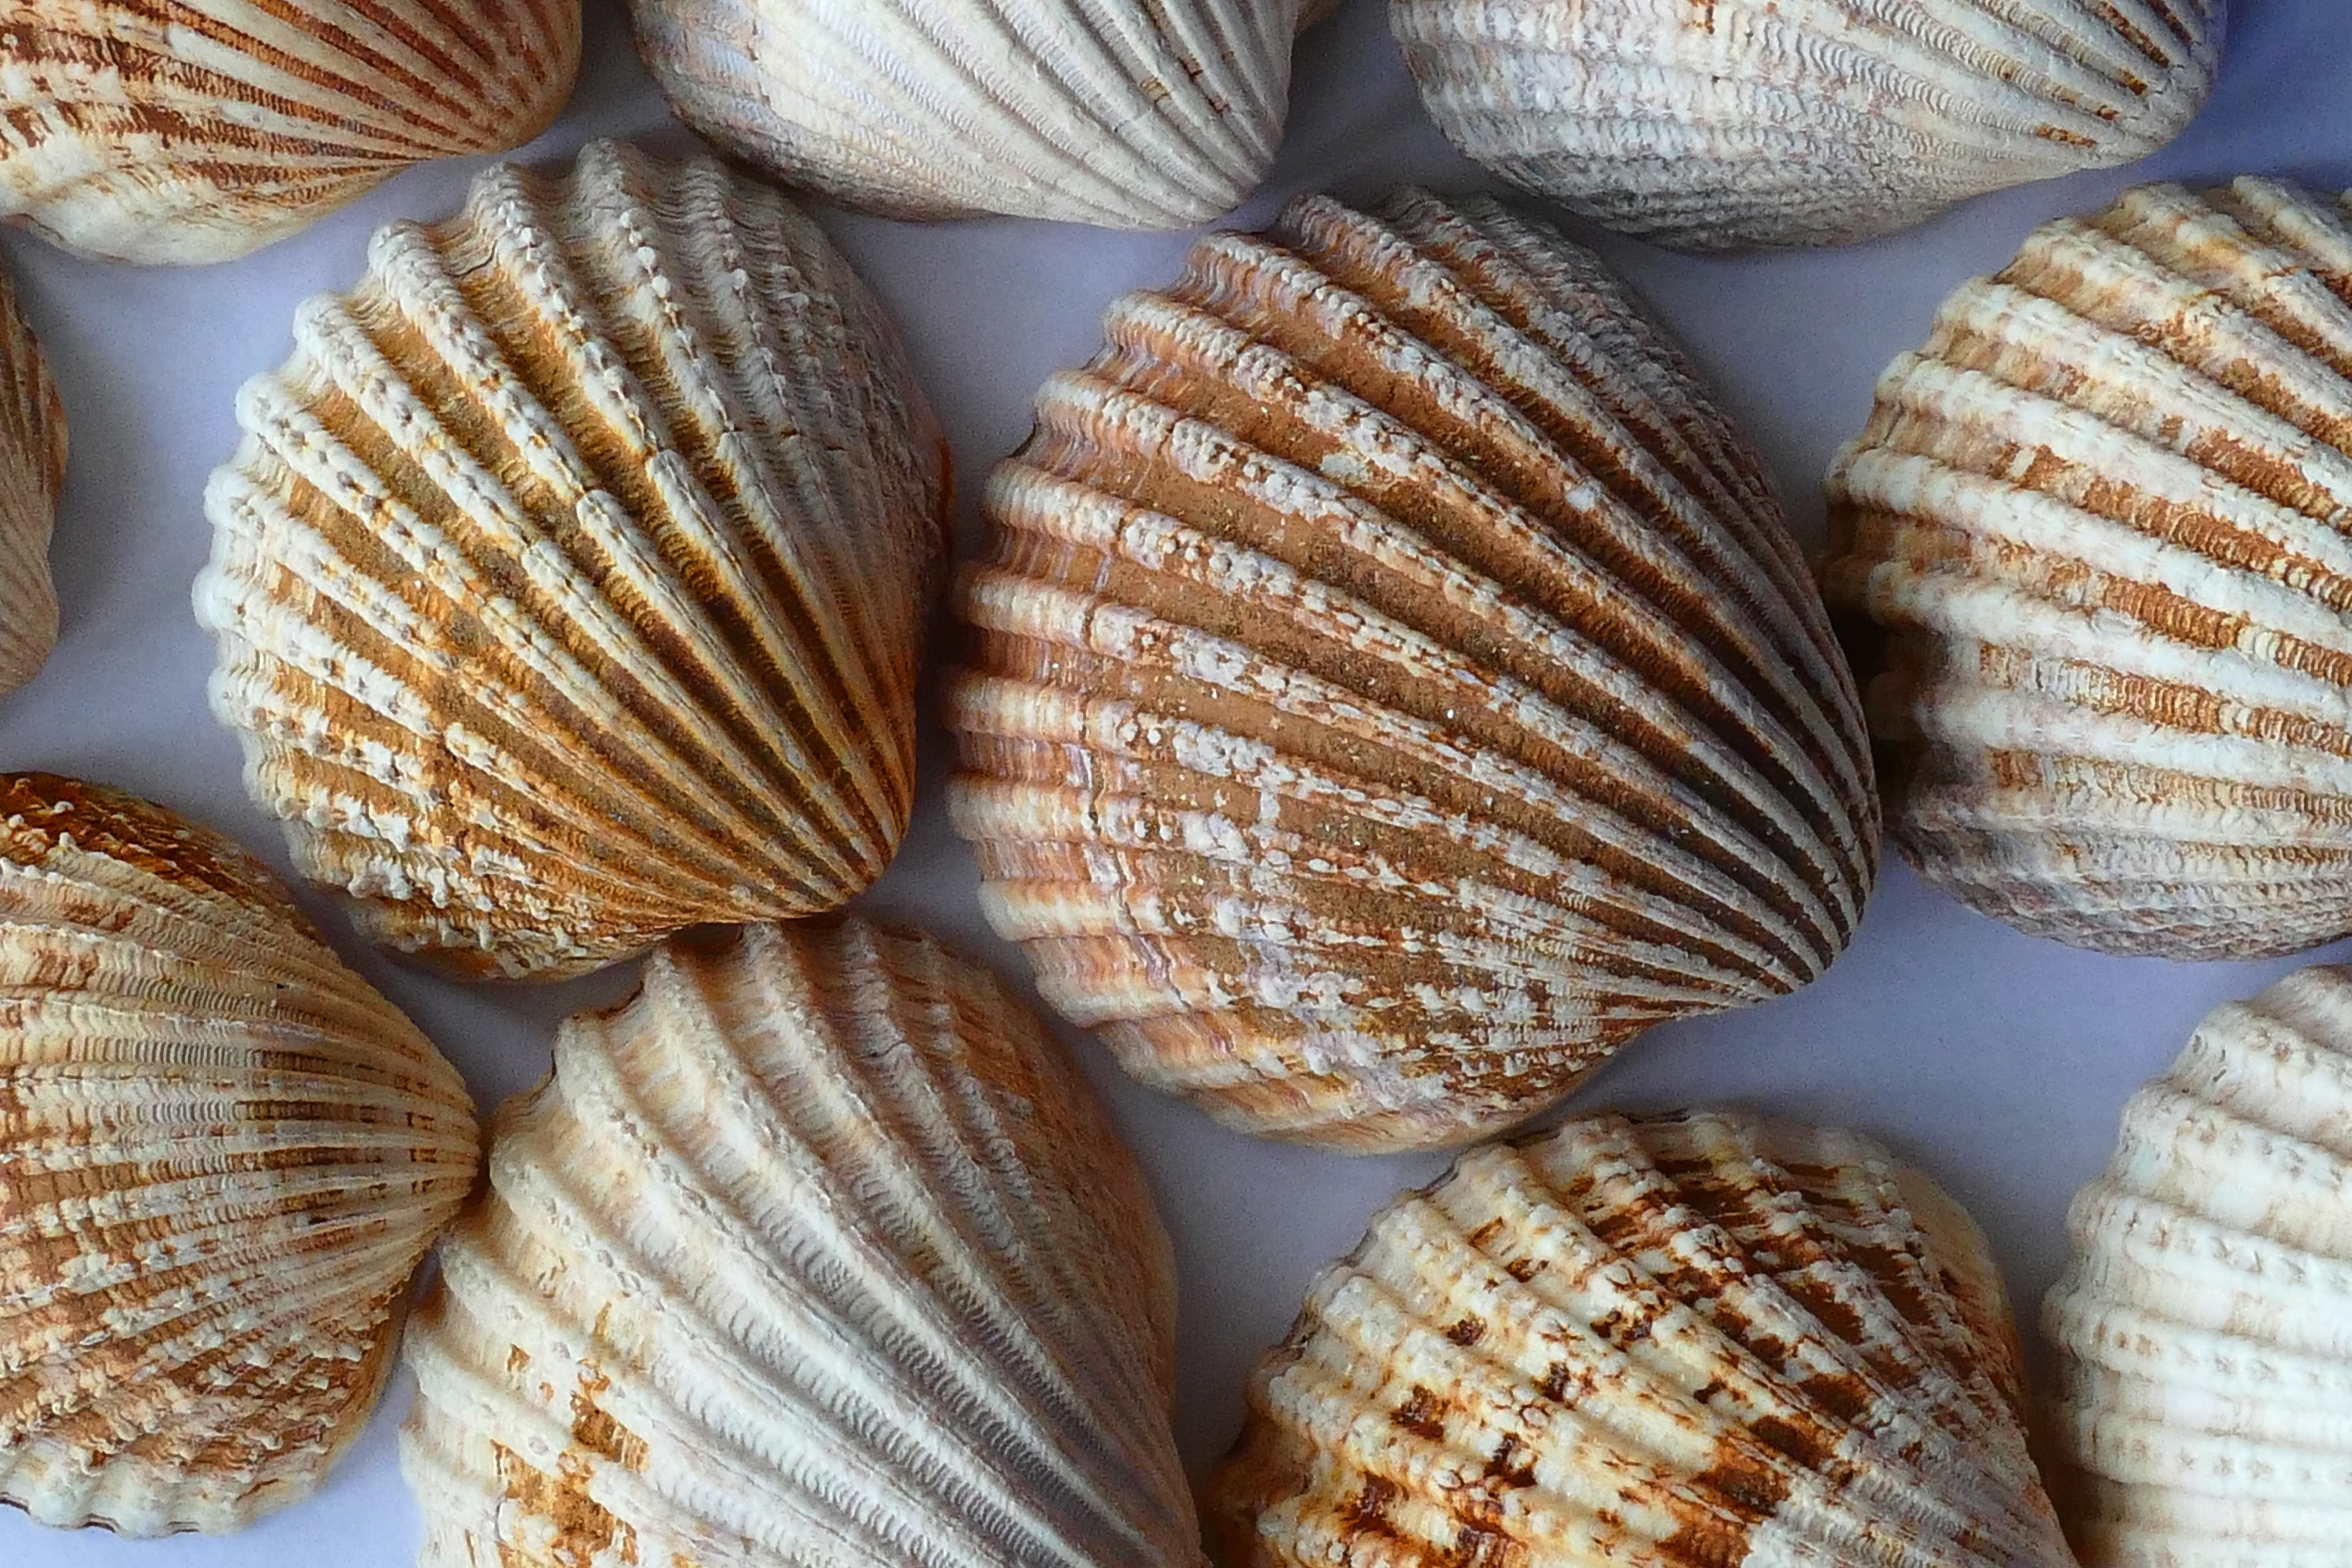 How to Clean Seashells the Right Way - Includes 2 methods